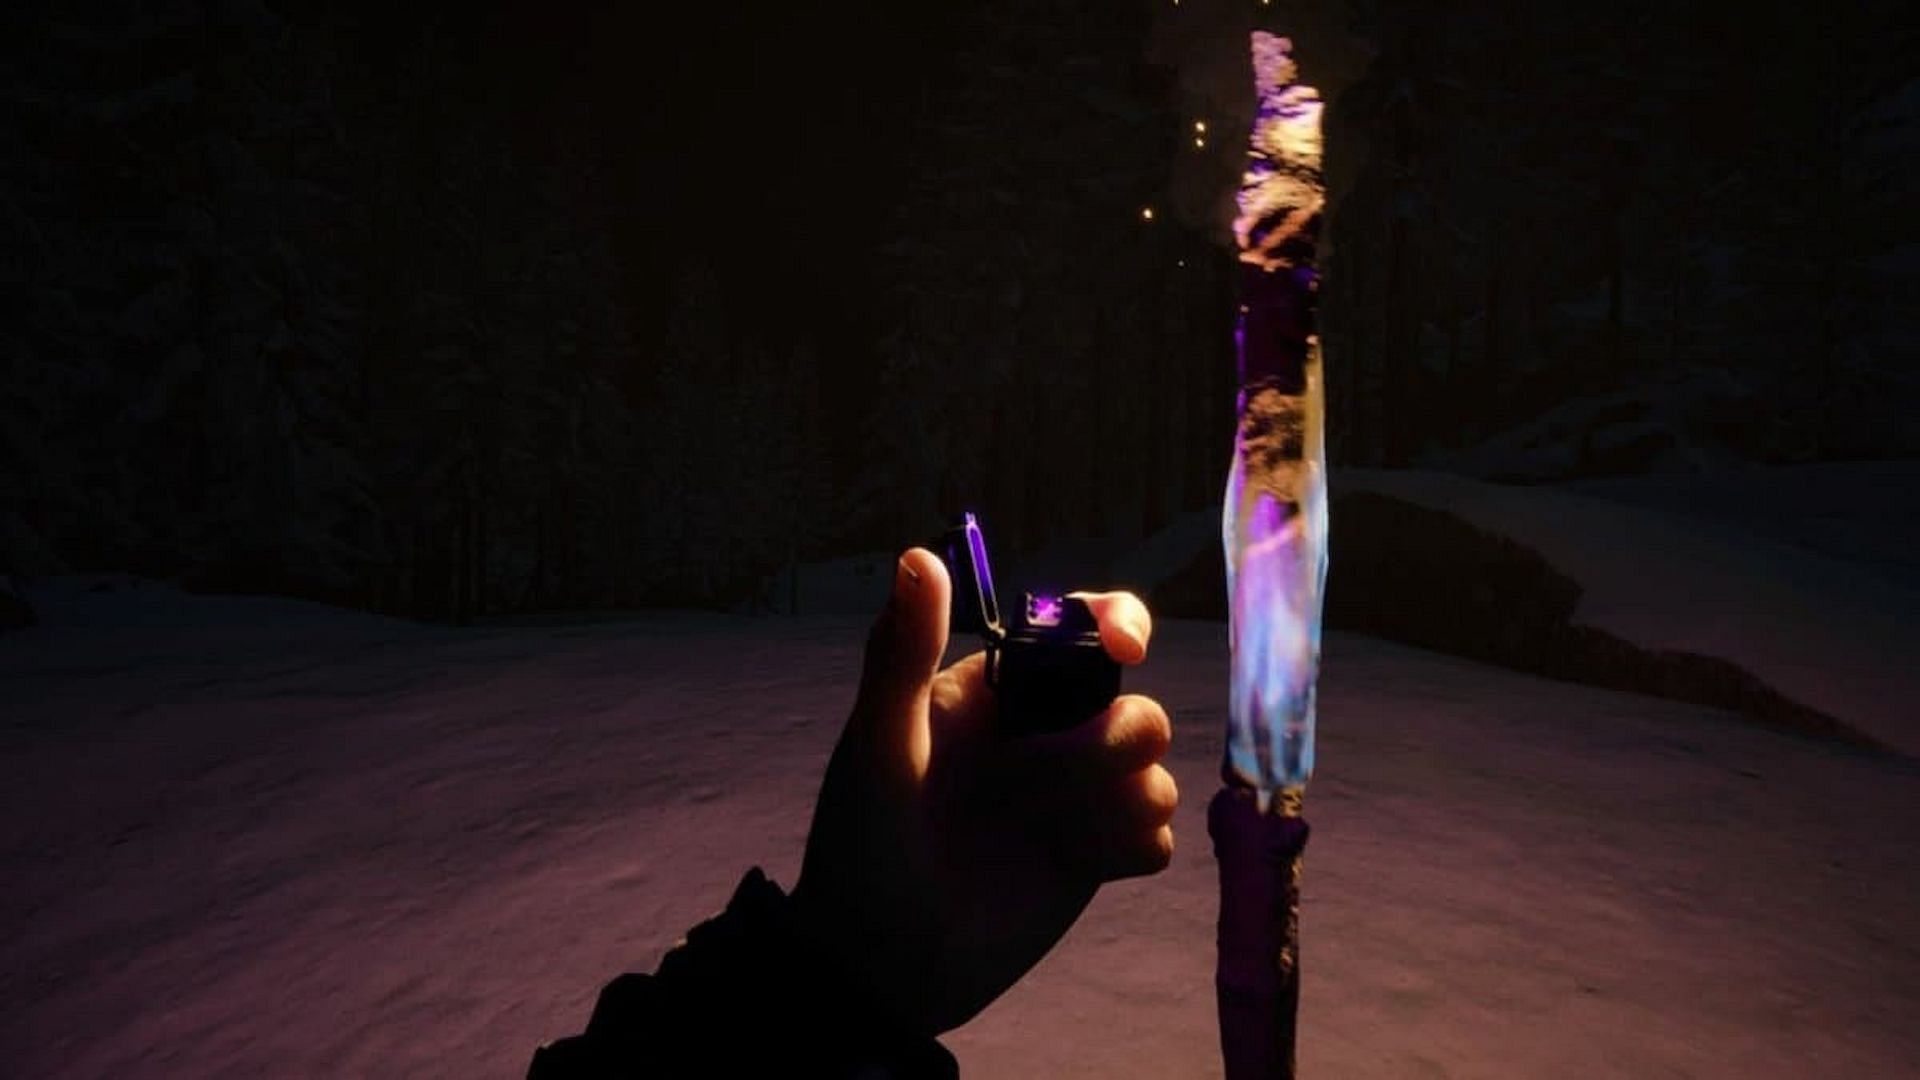 Crafting a Torch requires one Stick and one Cloth in Sons of the Forest (Image via Endnight Games)